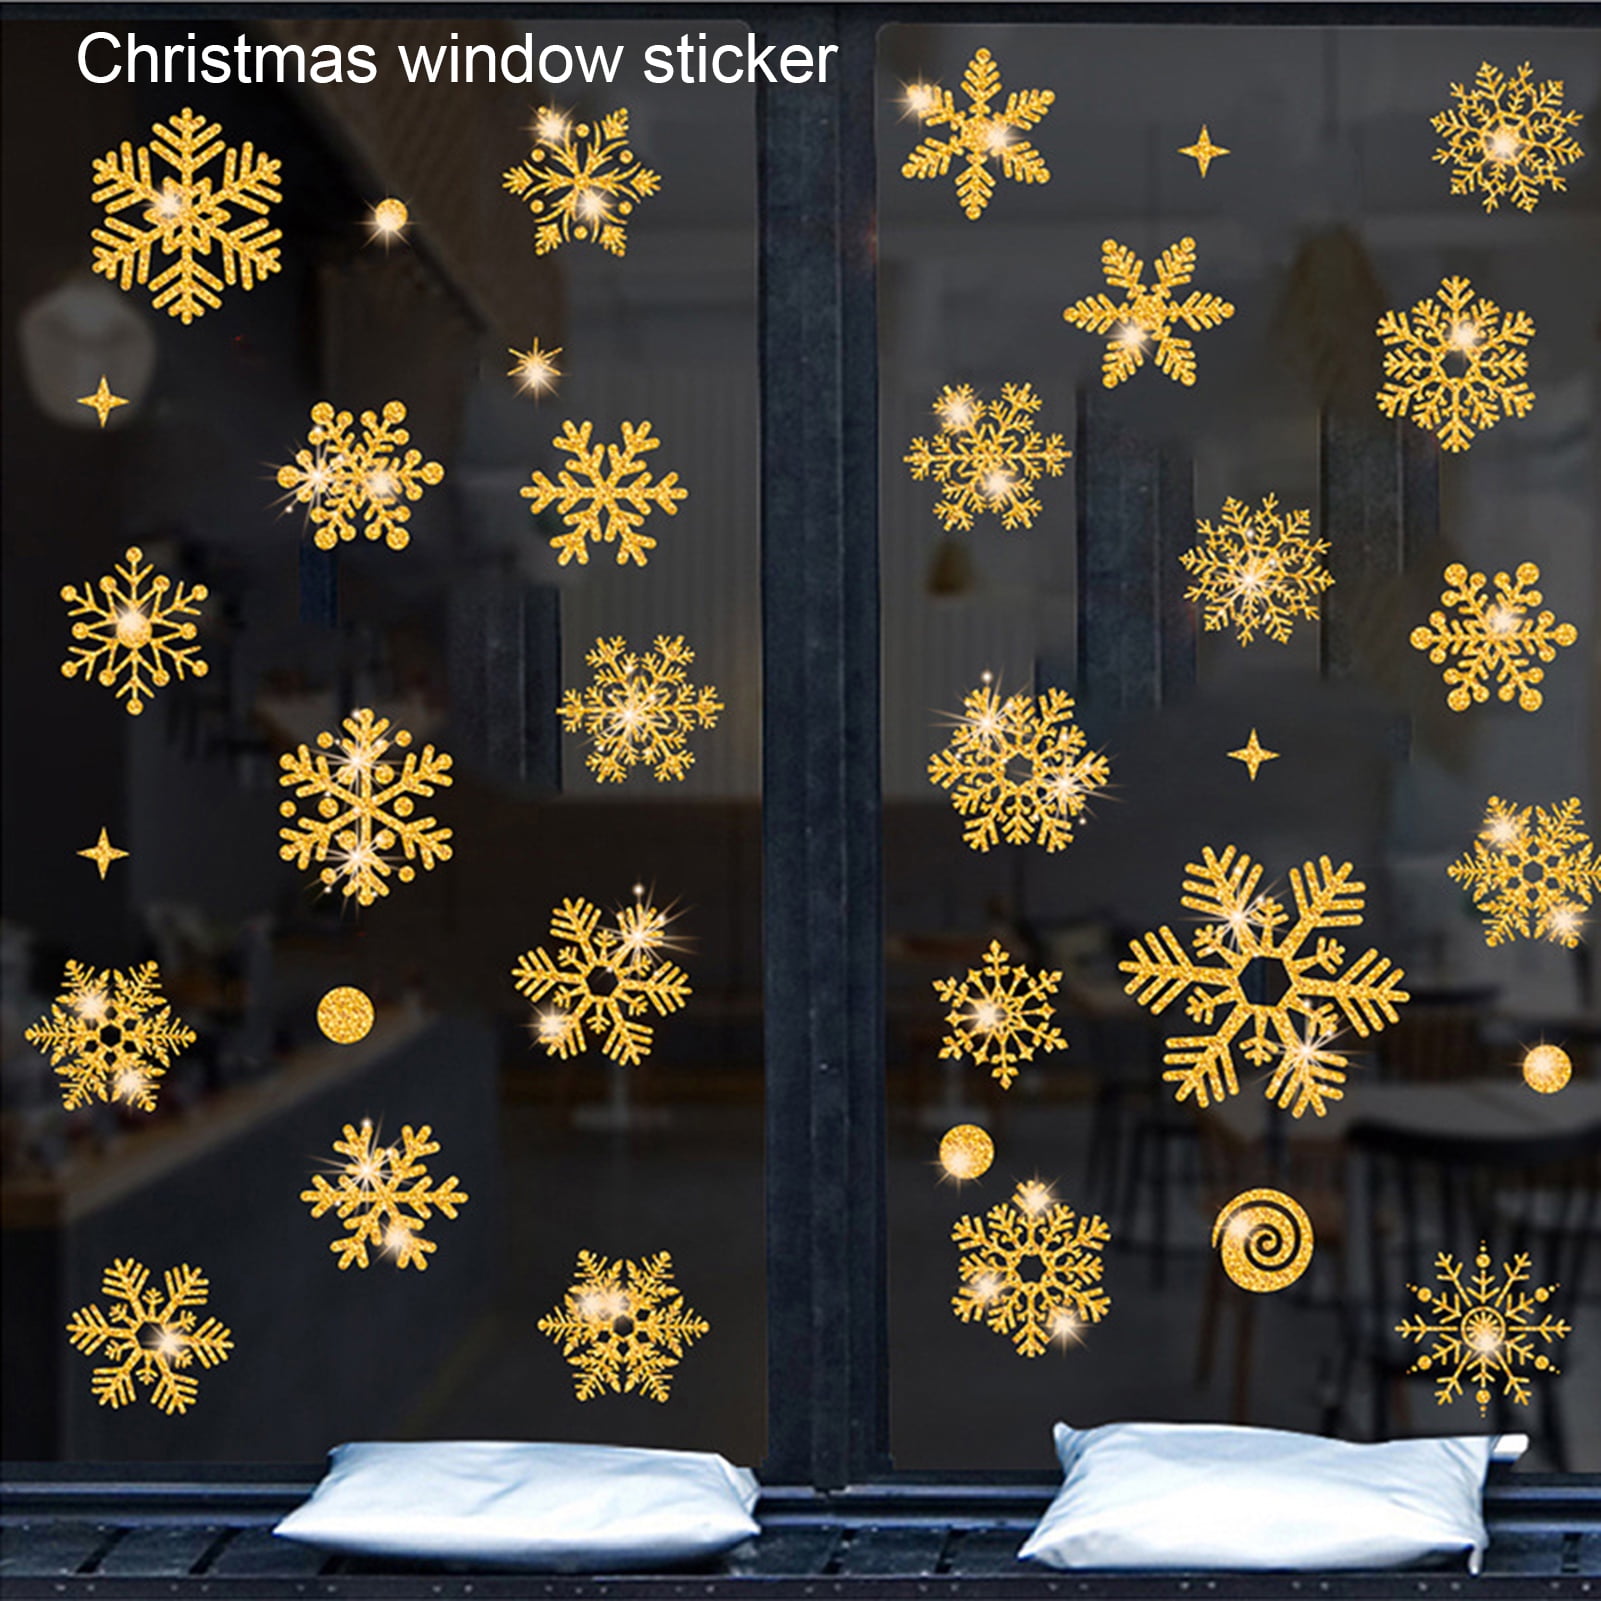 GOLD GLITTER WINDOW CLINGS SNOW STICKERS CHRISTMAS DECORATIONS 